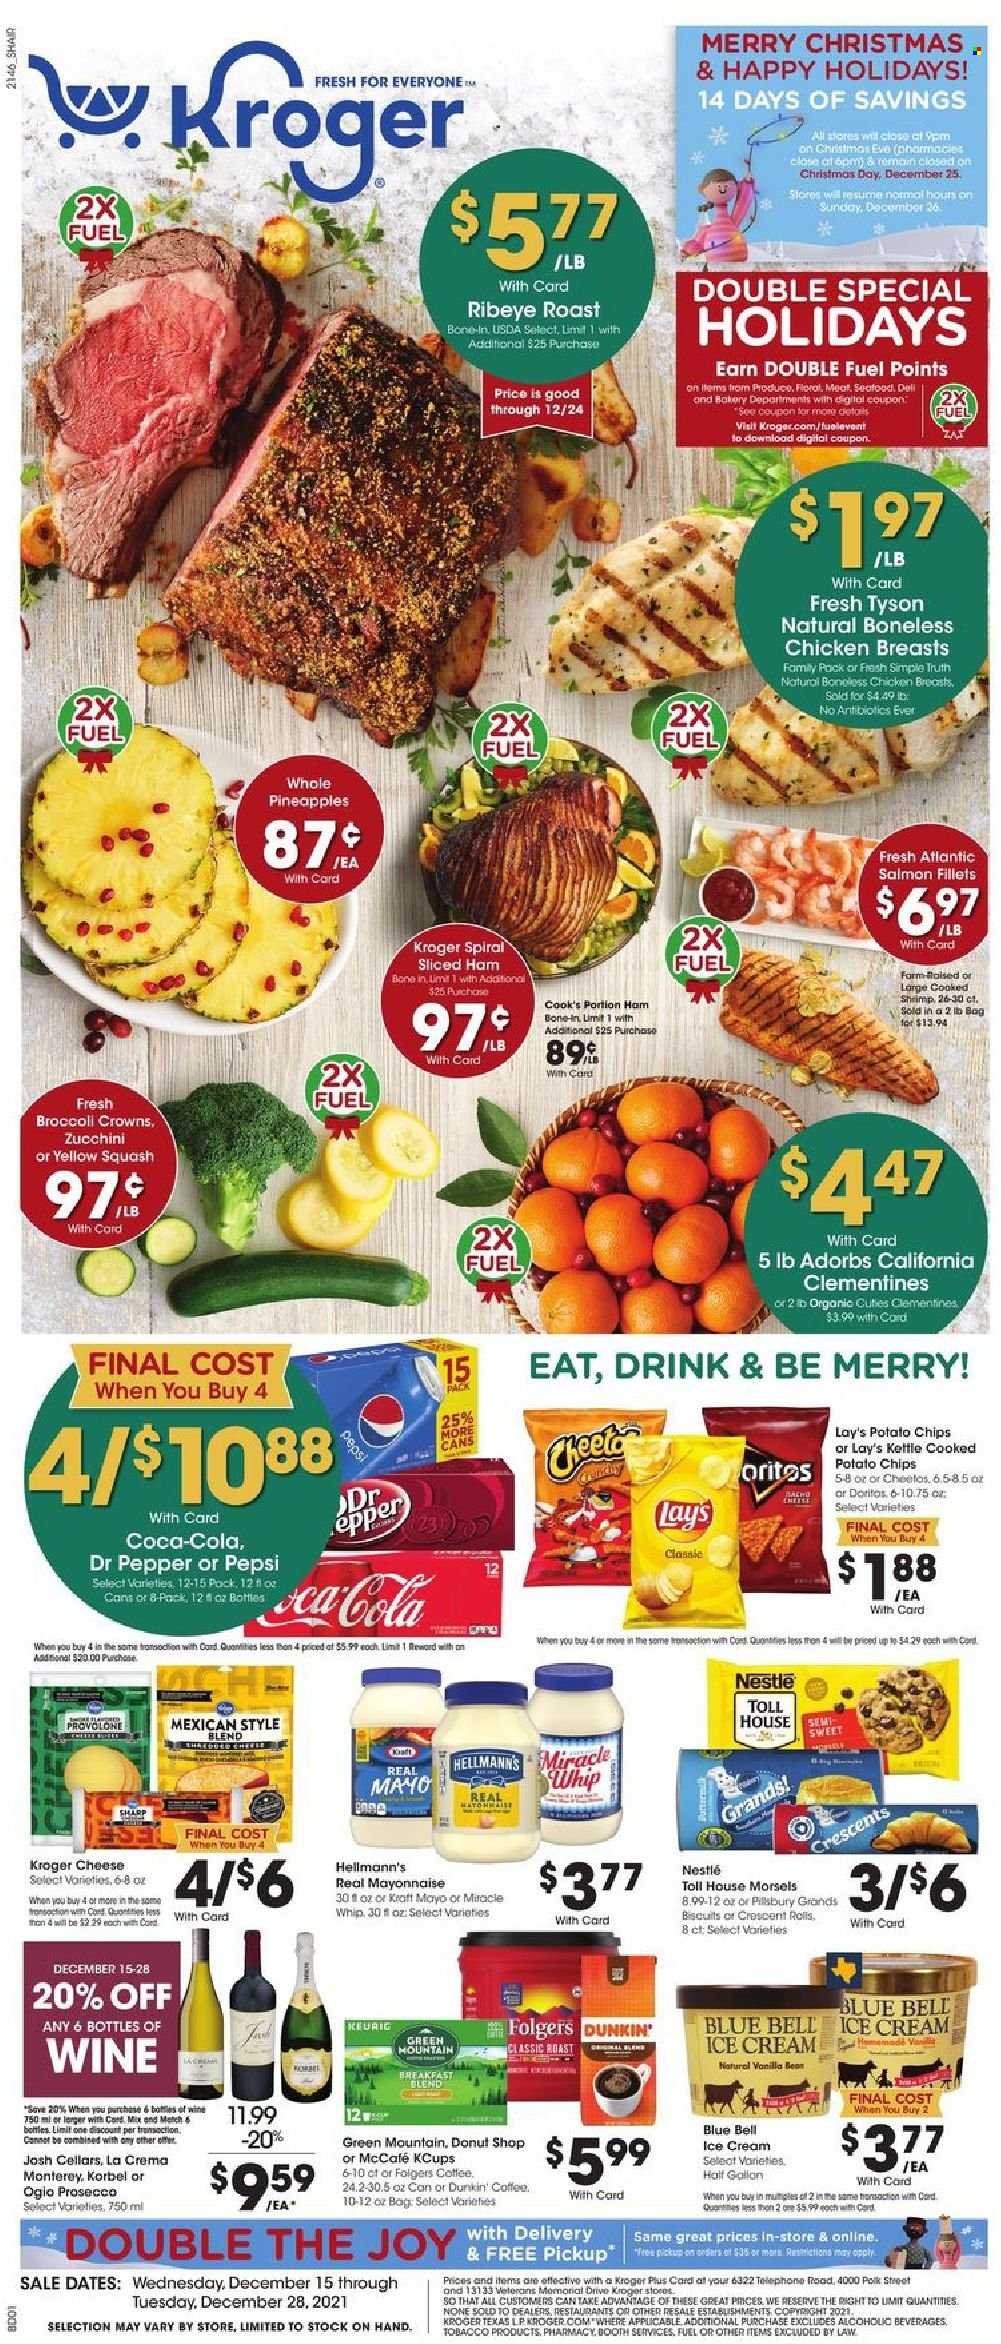 thumbnail - Kroger Flyer - 12/15/2021 - 12/28/2021 - Sales products - zucchini, yellow squash, pineapple, salmon, salmon fillet, shrimps, ham, Cook's, cheese, Provolone, mayonnaise, Miracle Whip, Hellmann’s, ice cream, Blue Bell, Nestlé, biscuit, Doritos, potato chips, chips, Lay’s, Coca-Cola, Pepsi, Dr. Pepper, coffee, Folgers, Keurig, breakfast blend, Green Mountain, prosecco, wine, chicken breasts, Sharp, clementines. Page 1.